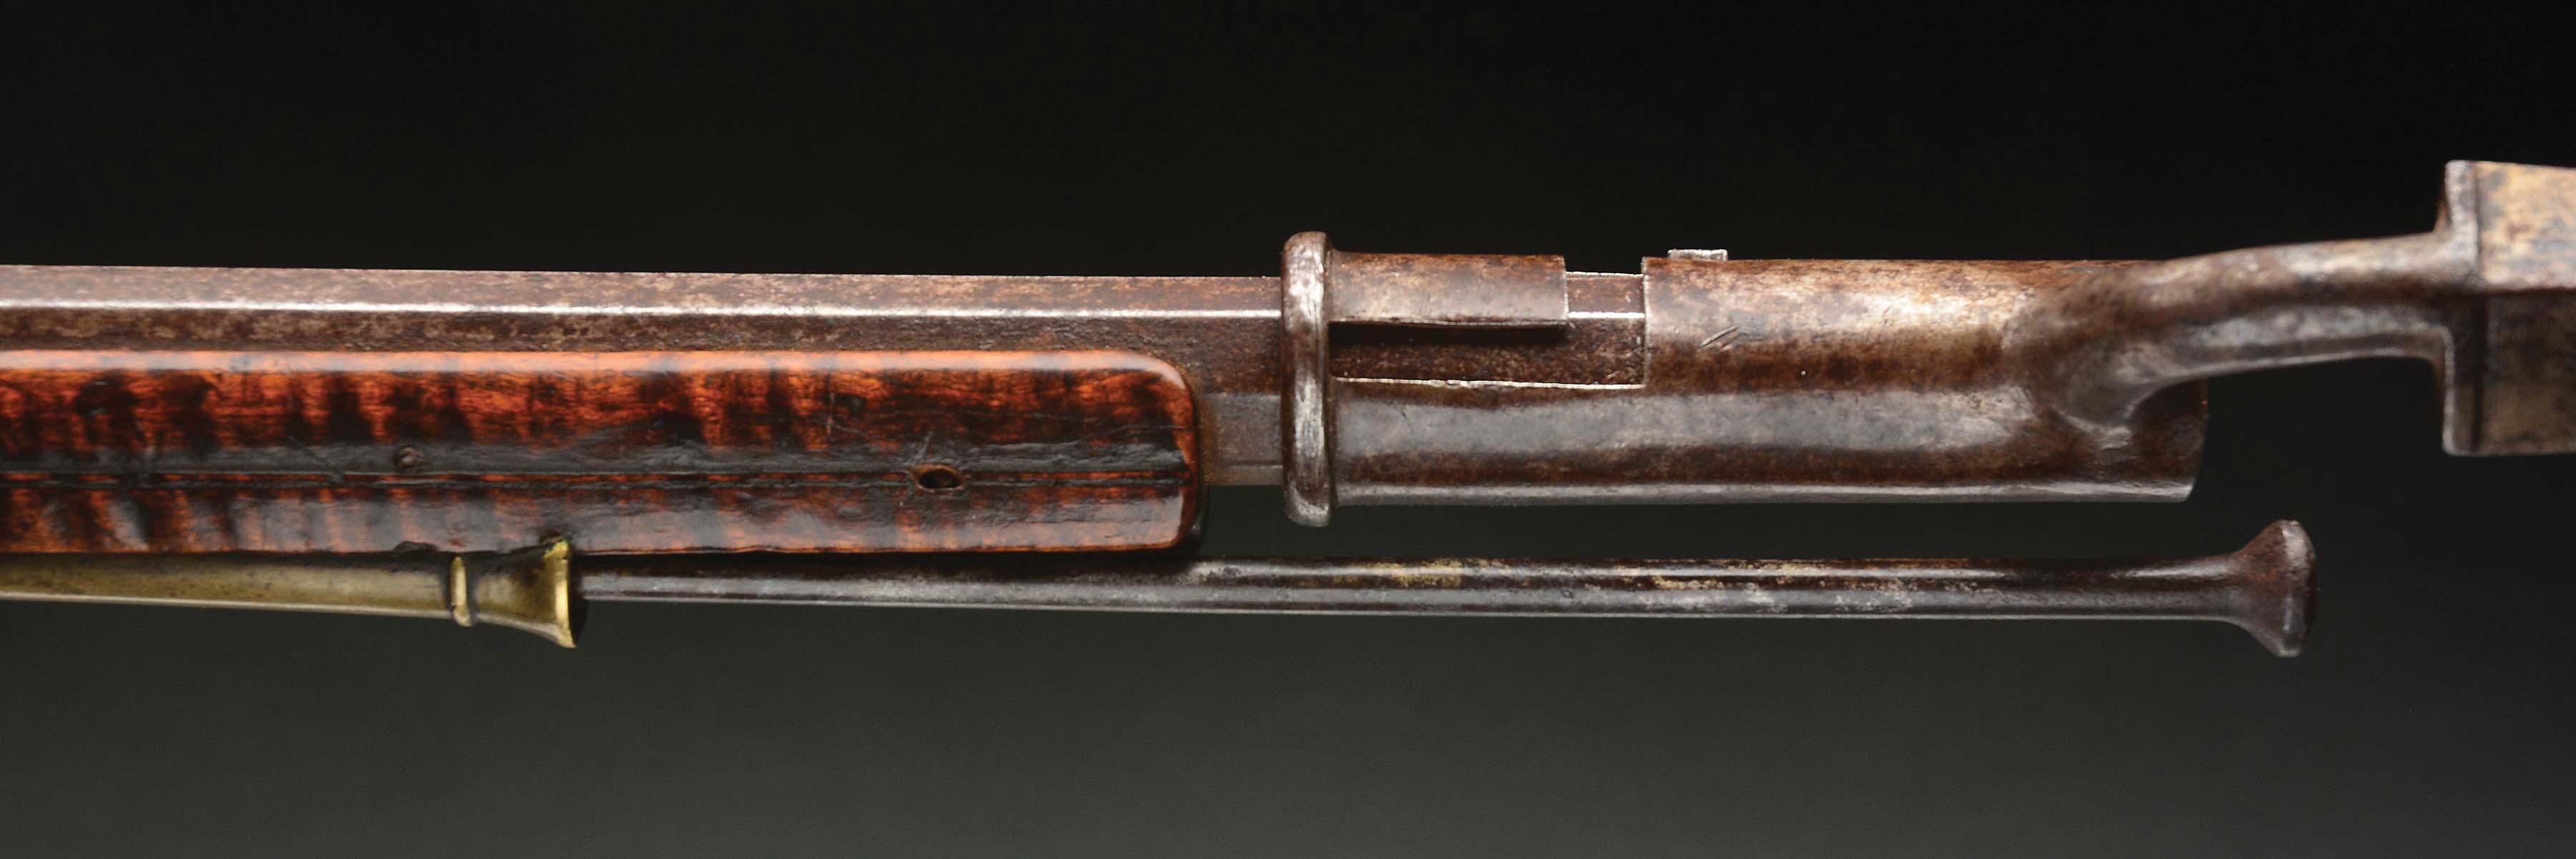 (A) IMPORTANT AND HISTORIC "LION AND LAMB' MORAVIAN FLINTLOCK RIFLE WITH BAYONET, ATTRIBUTED TO ANDR